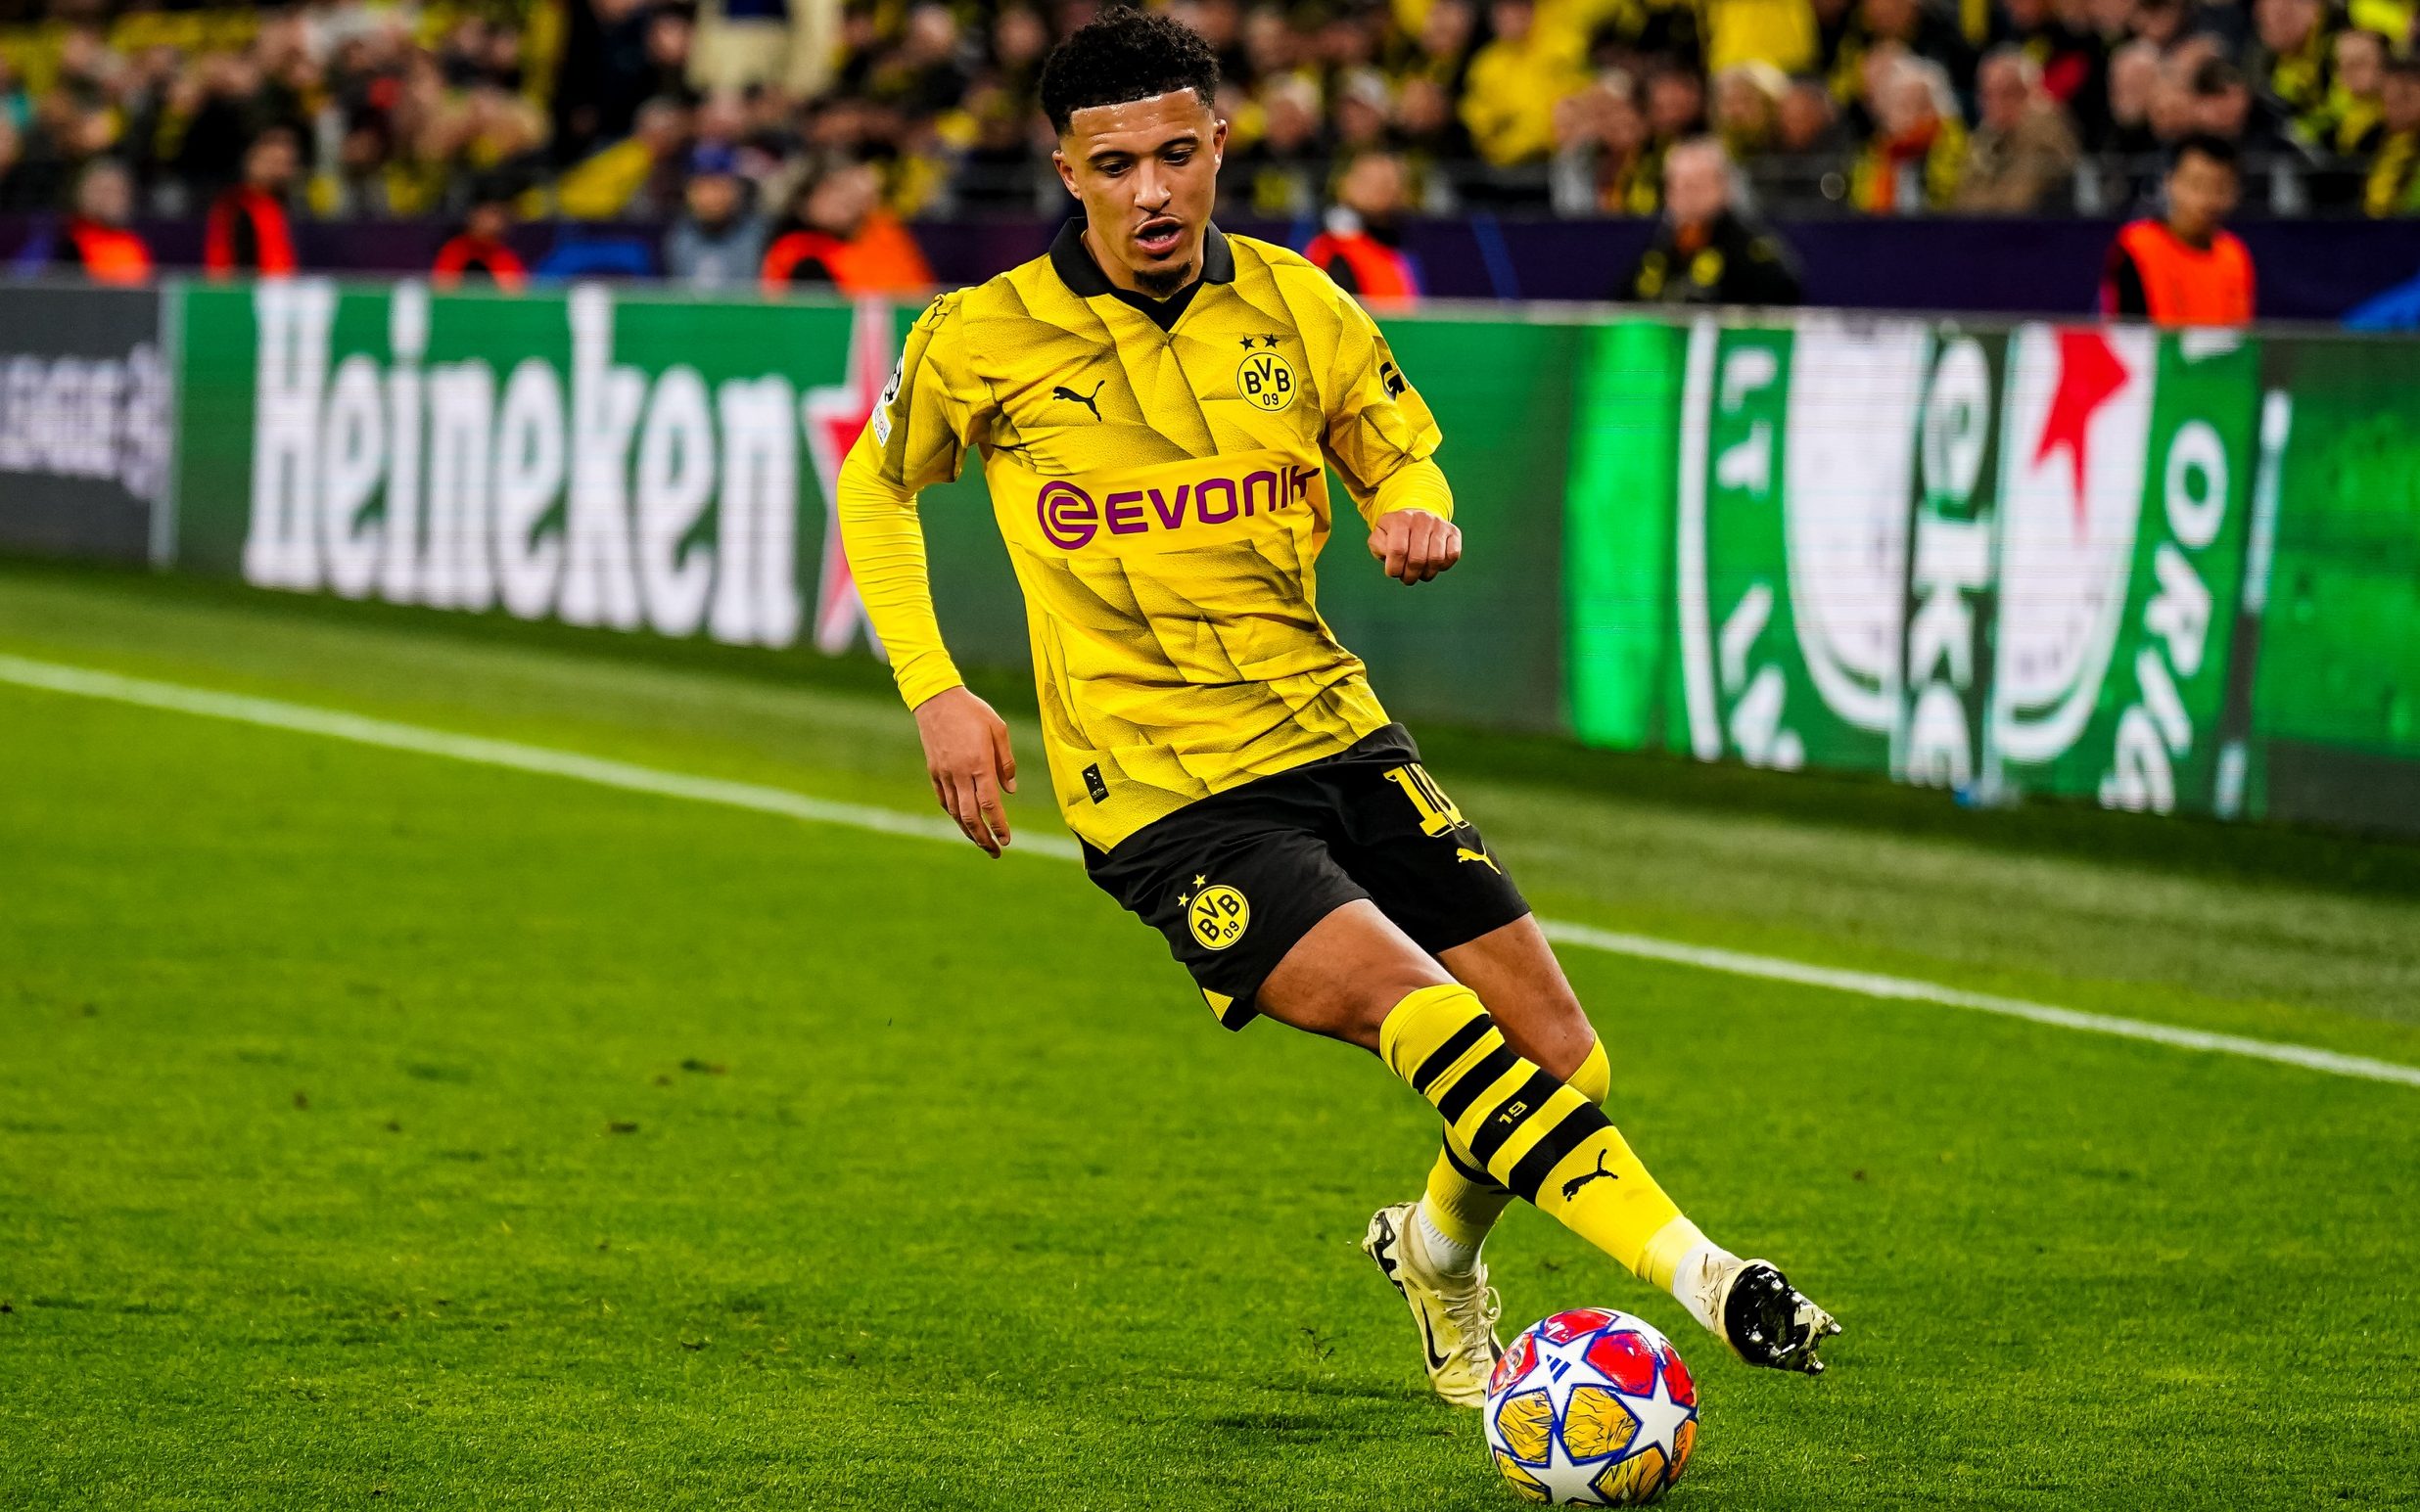 the reason manchester united are hoping jadon sancho shines in the champions league